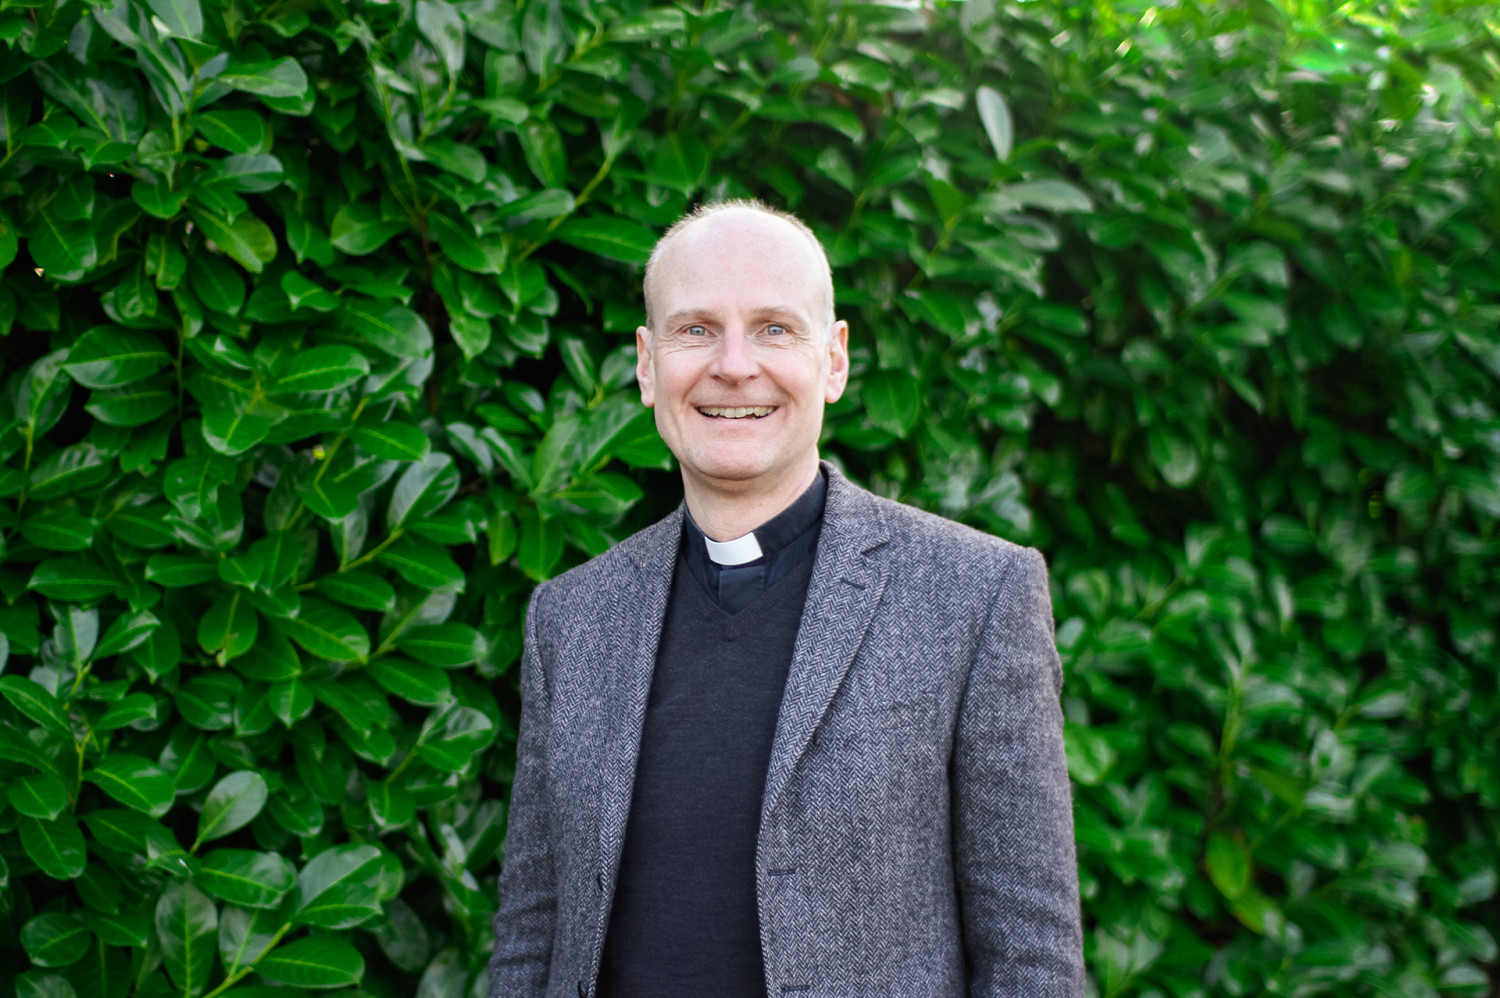 Profile shot of the Archdeacon of Dorking